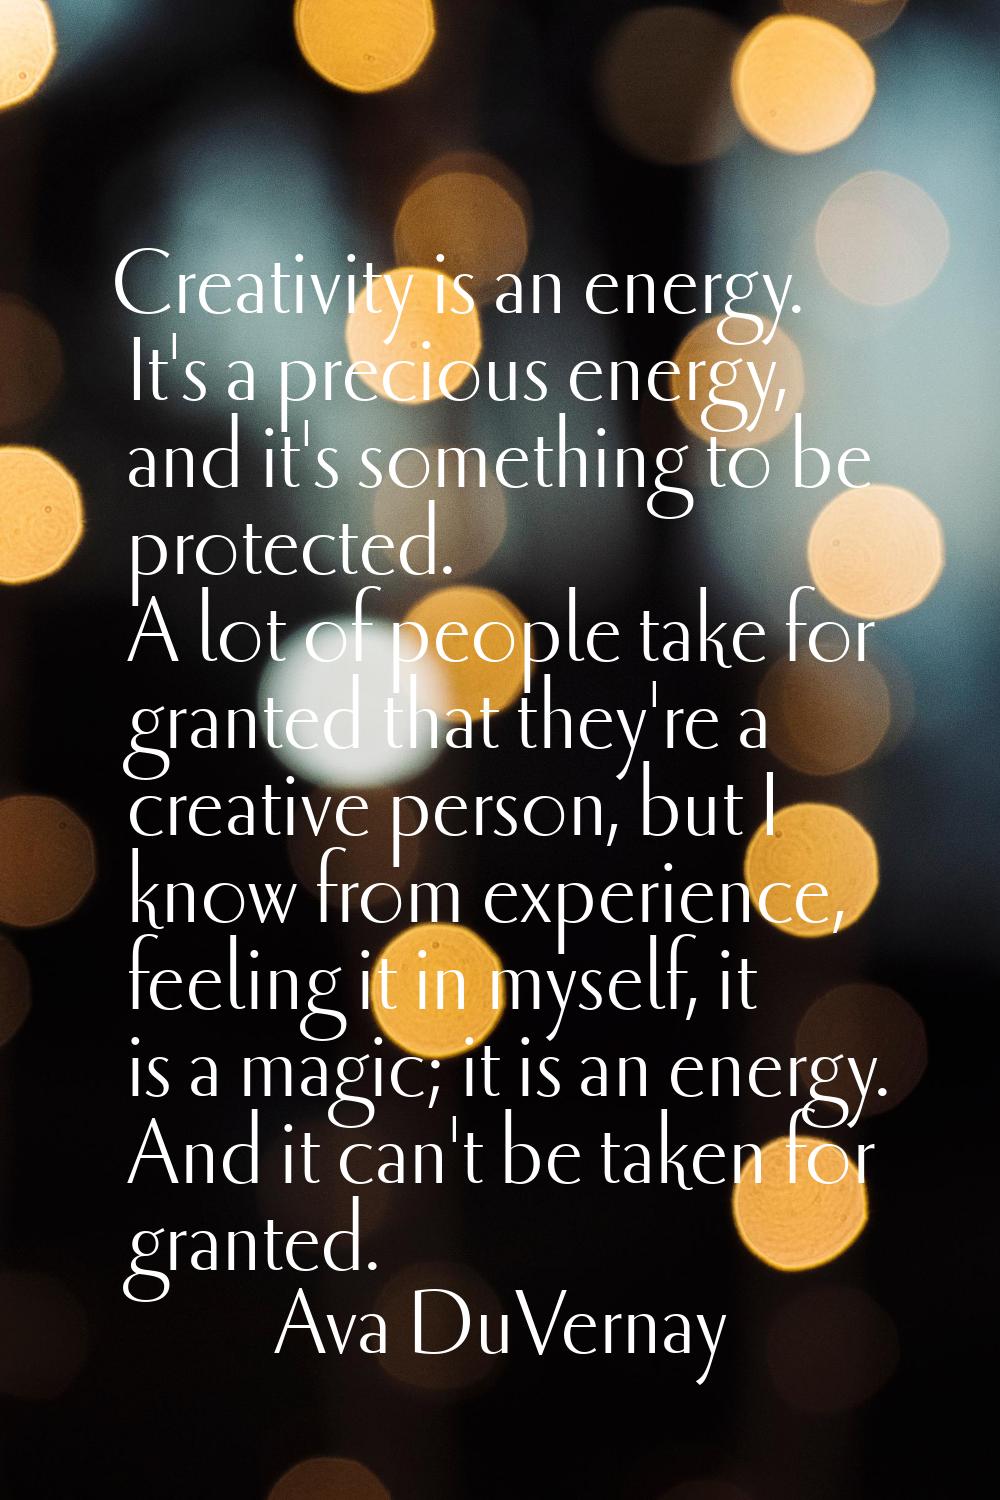 Creativity is an energy. It's a precious energy, and it's something to be protected. A lot of peopl